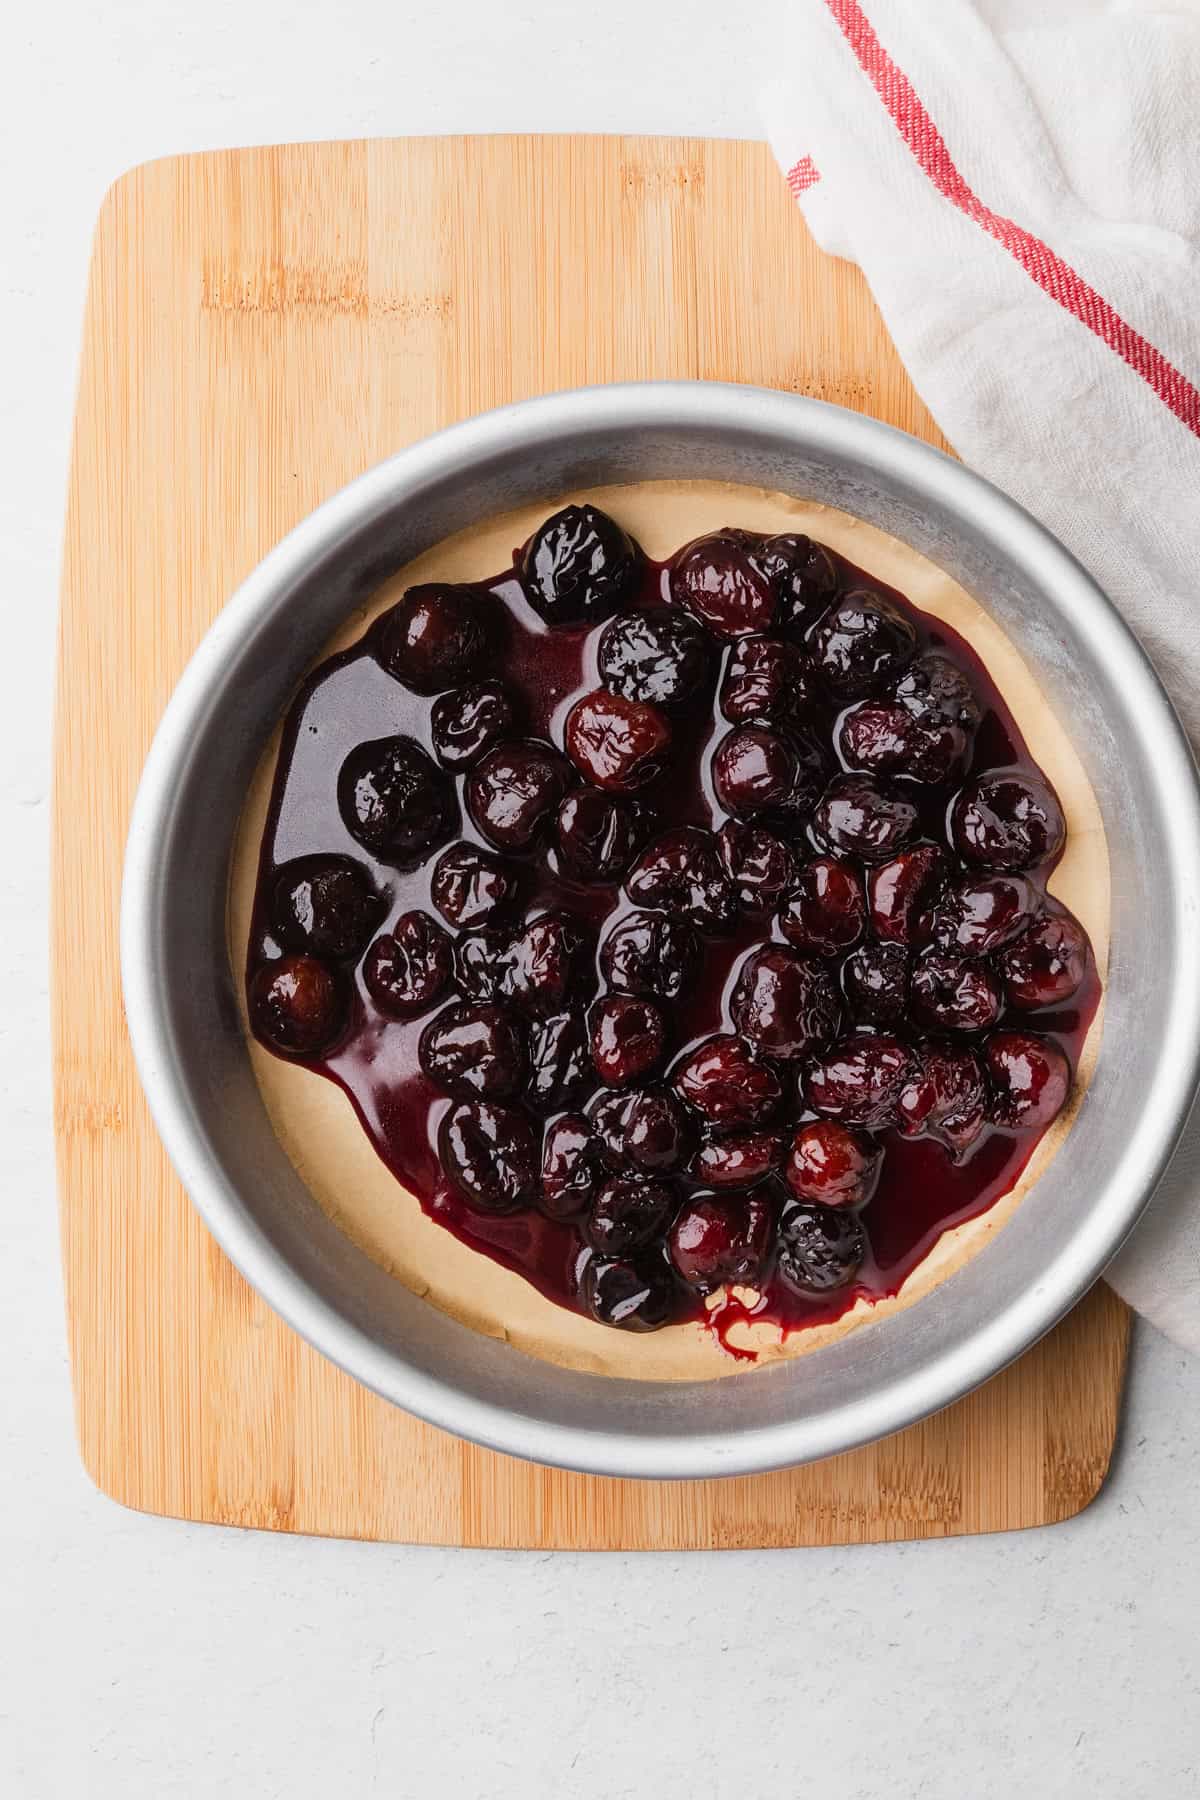 Cooked cherries in a cake pan.